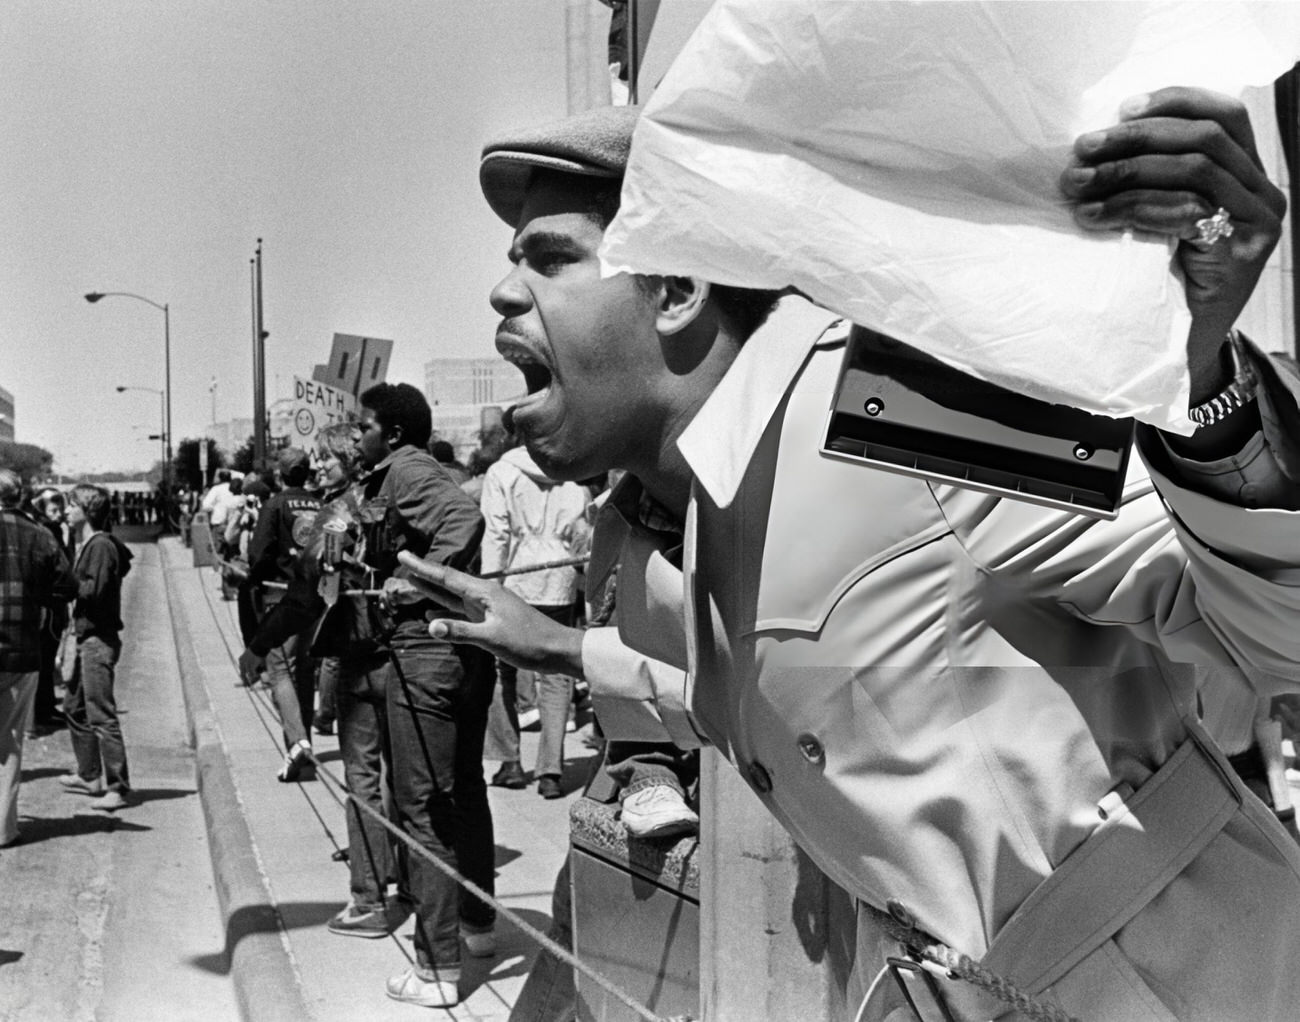 Protesters and police during a Ku Klux Klan march in downtown Houston, Texas, 1983.